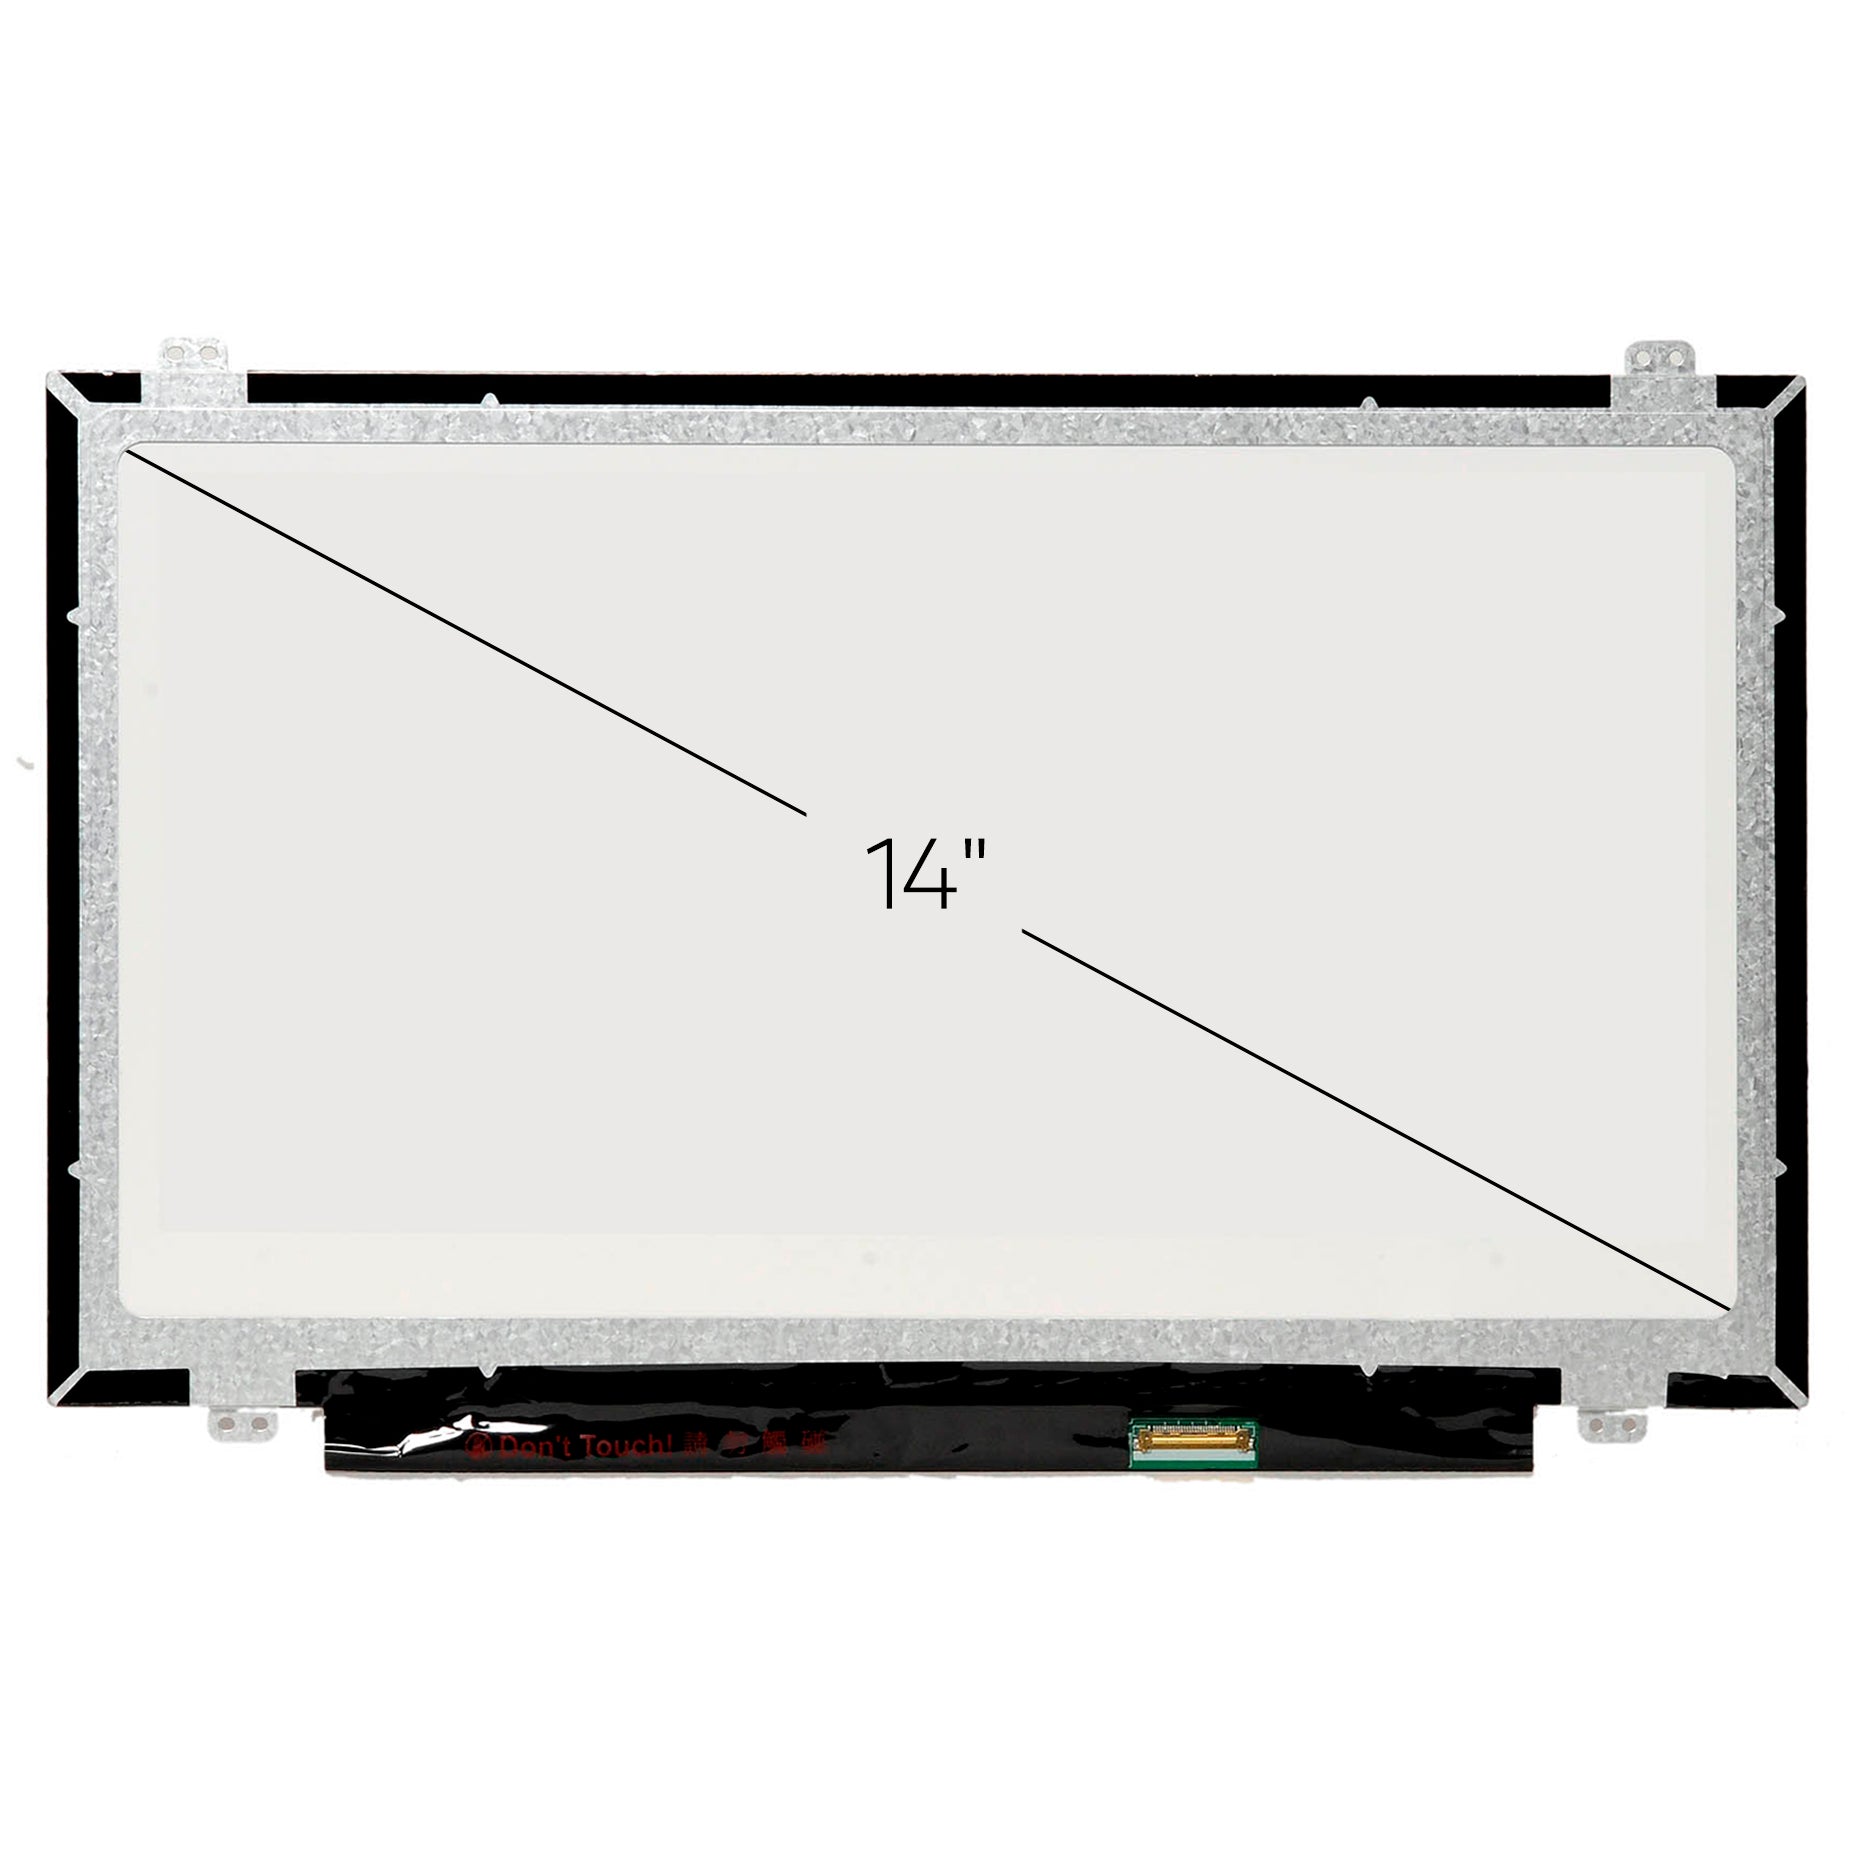 Screen Replacement for Lenovo Thinkpad E460 20ET0014US HD 1366x768 Glossy LCD LED Display